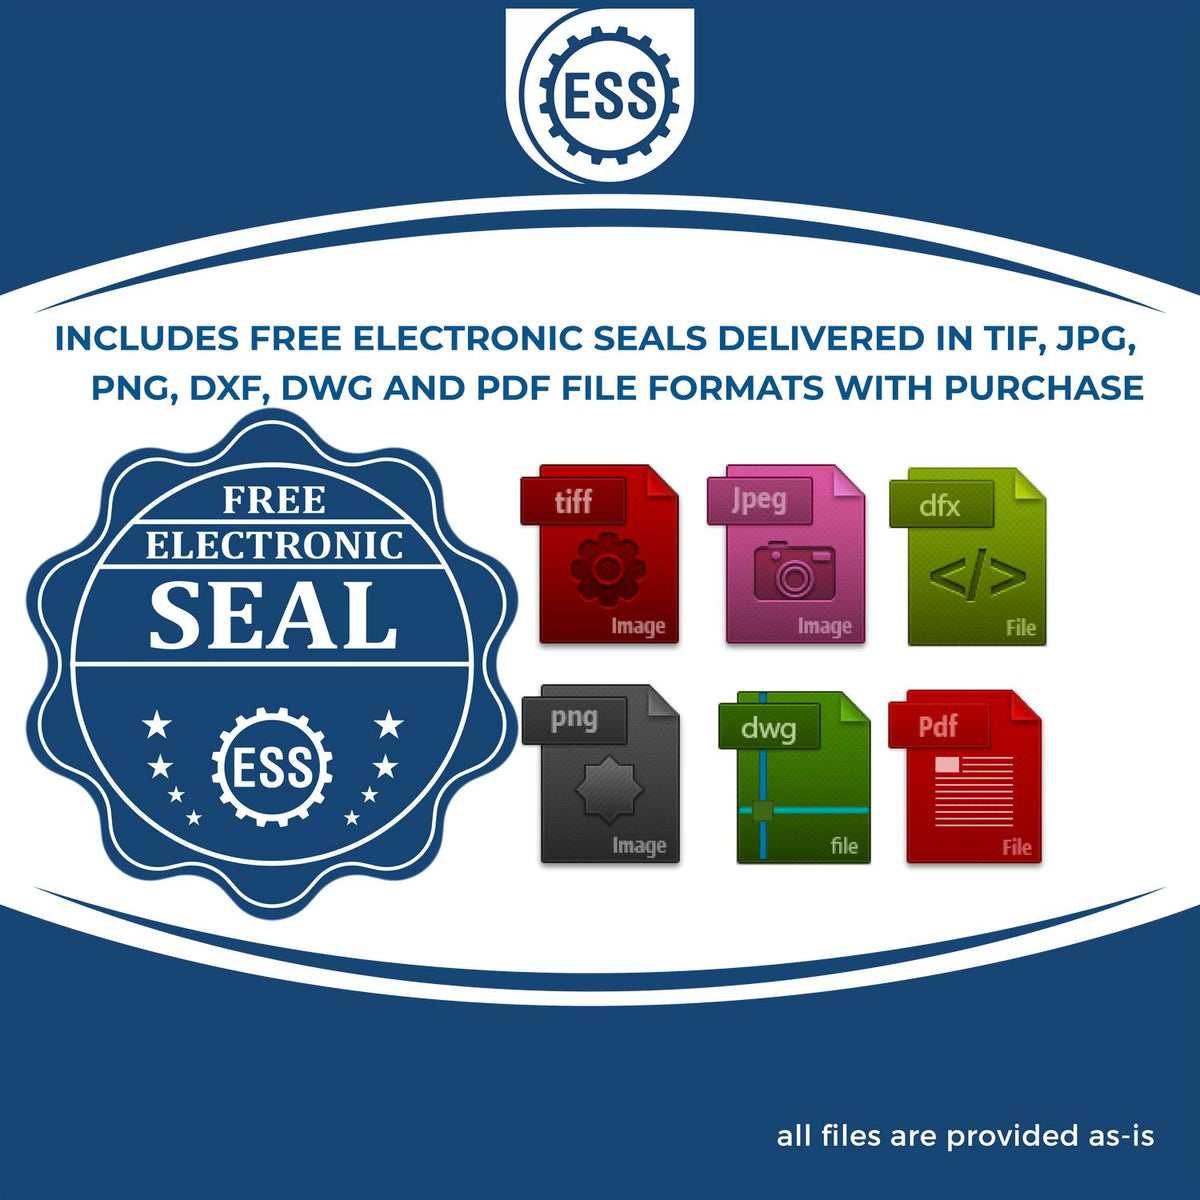 An infographic for the free electronic seal for the Gift Florida Architect Seal illustrating the different file type icons such as DXF, DWG, TIF, JPG and PNG.